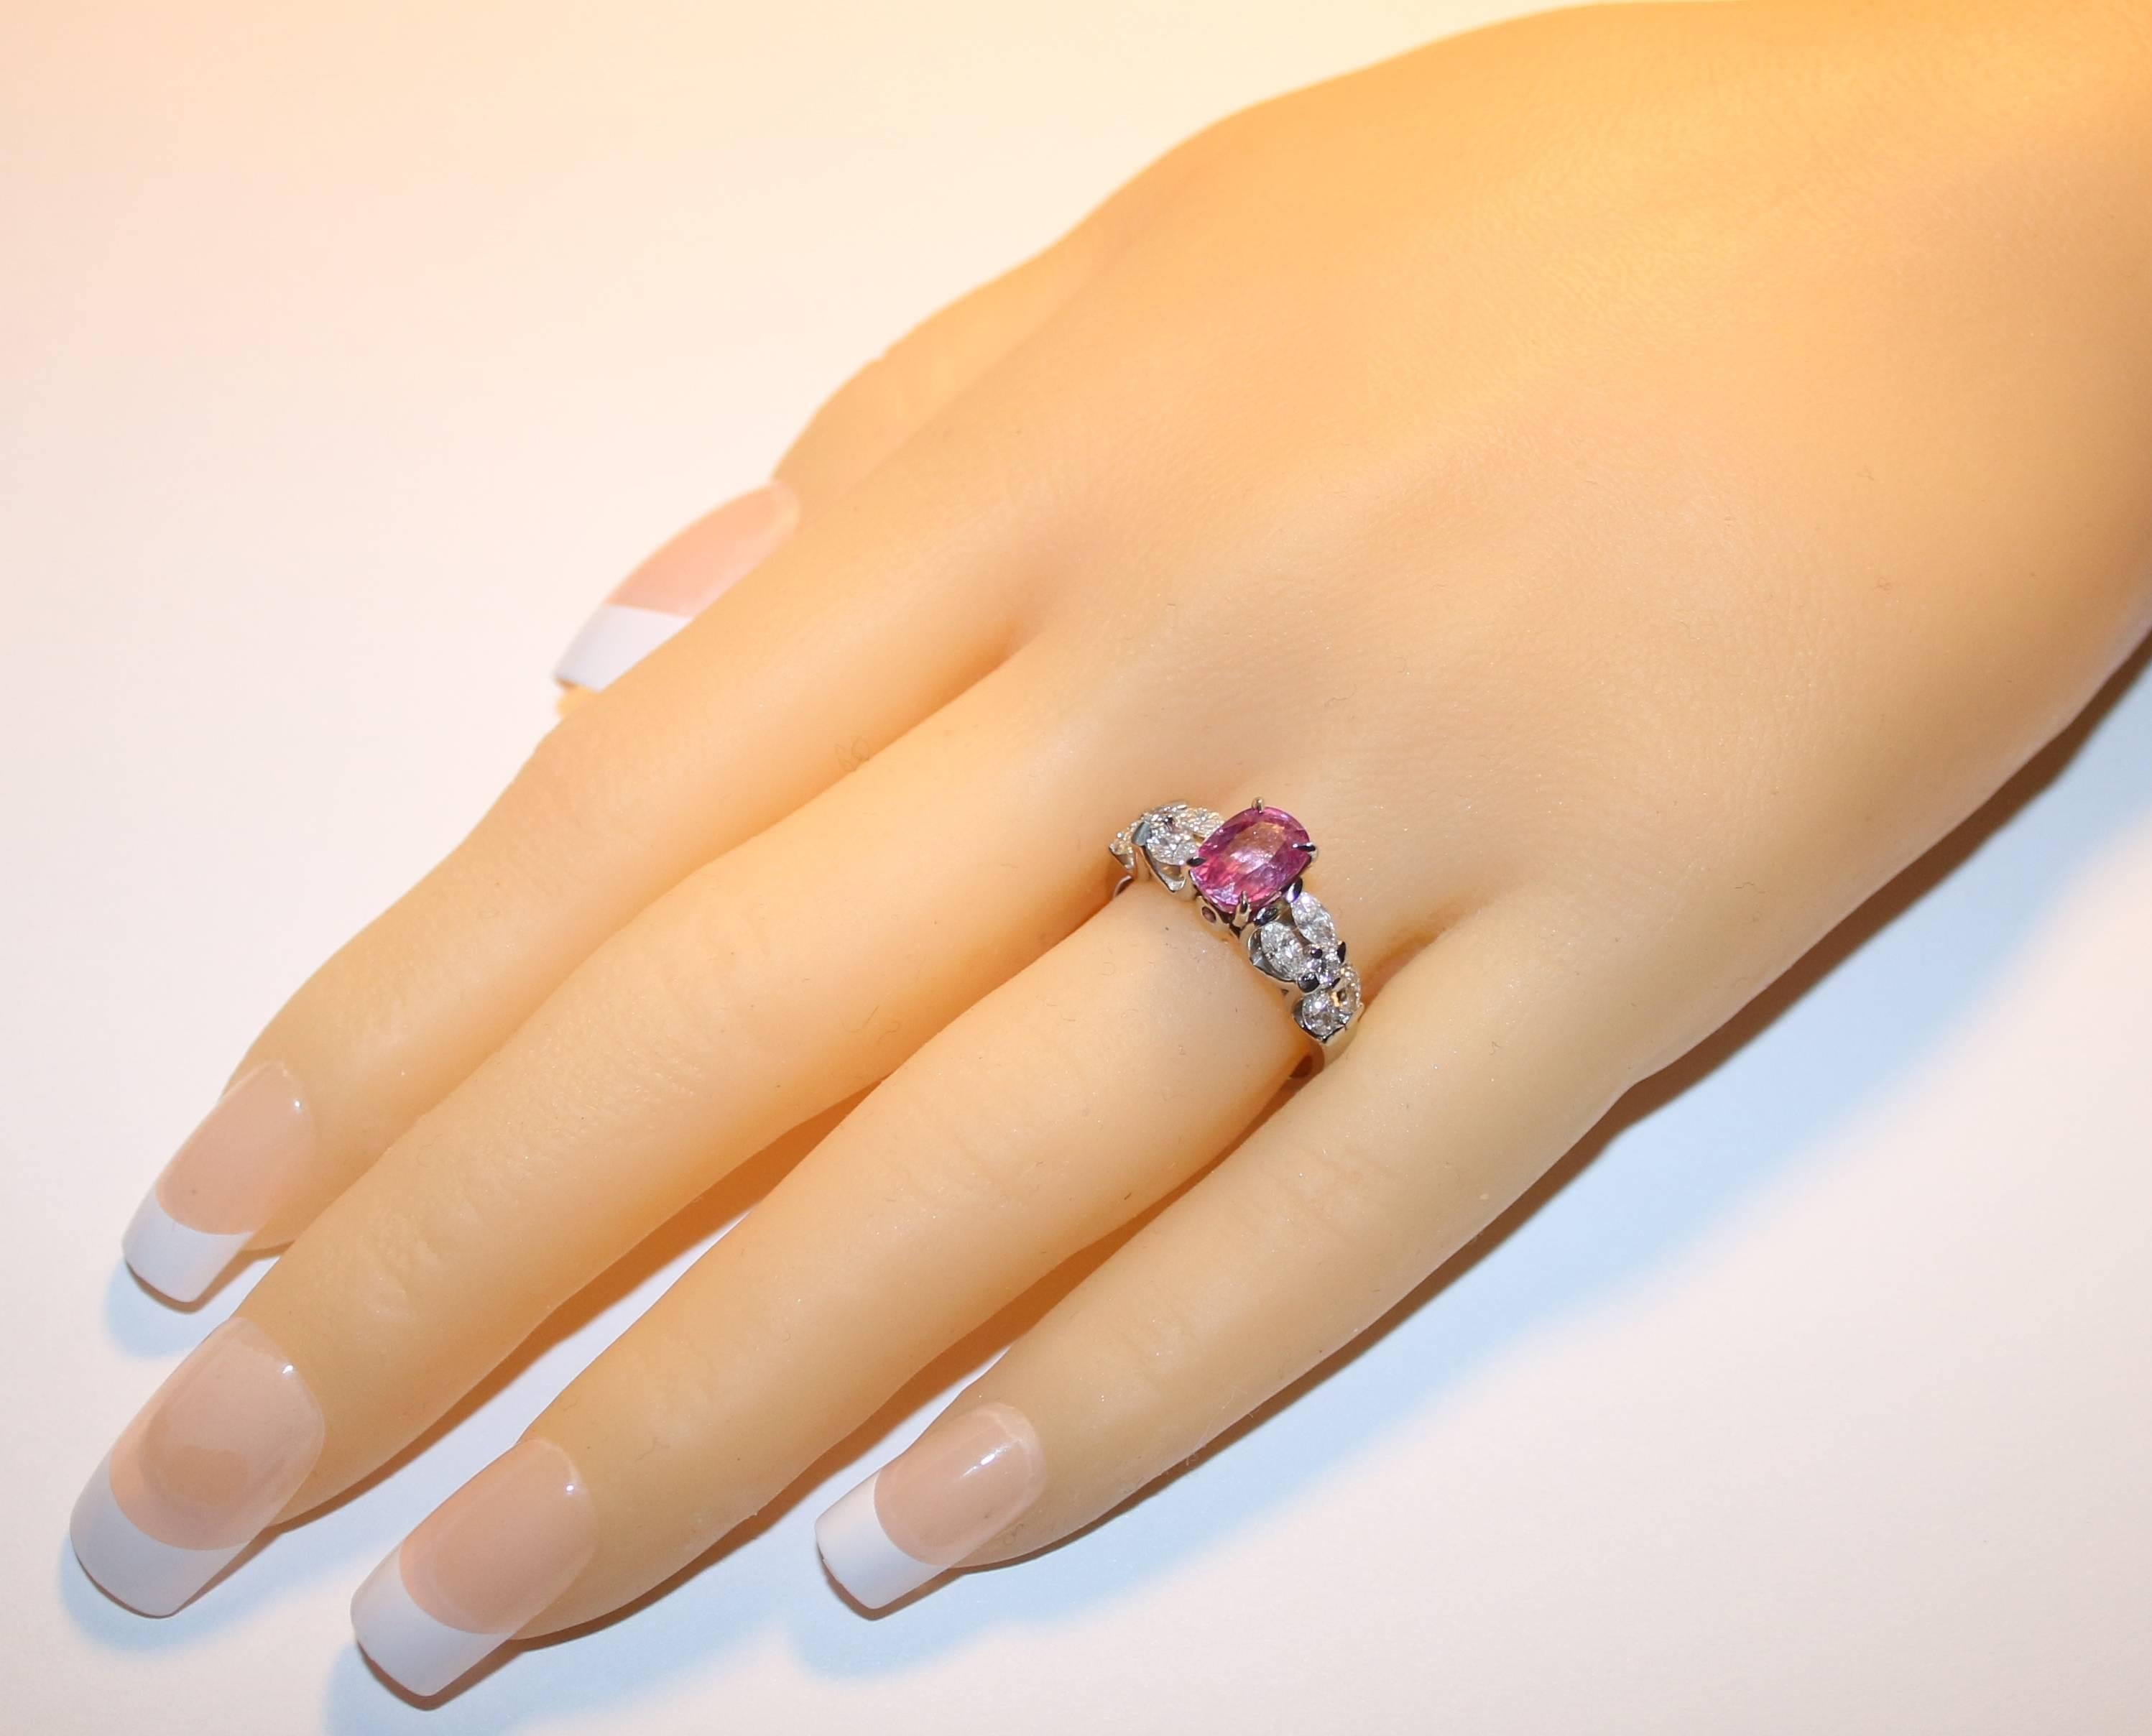 Contemporary Certified 2.09 Carat Oval Pink Sapphire Diamond Platinum Ring For Sale